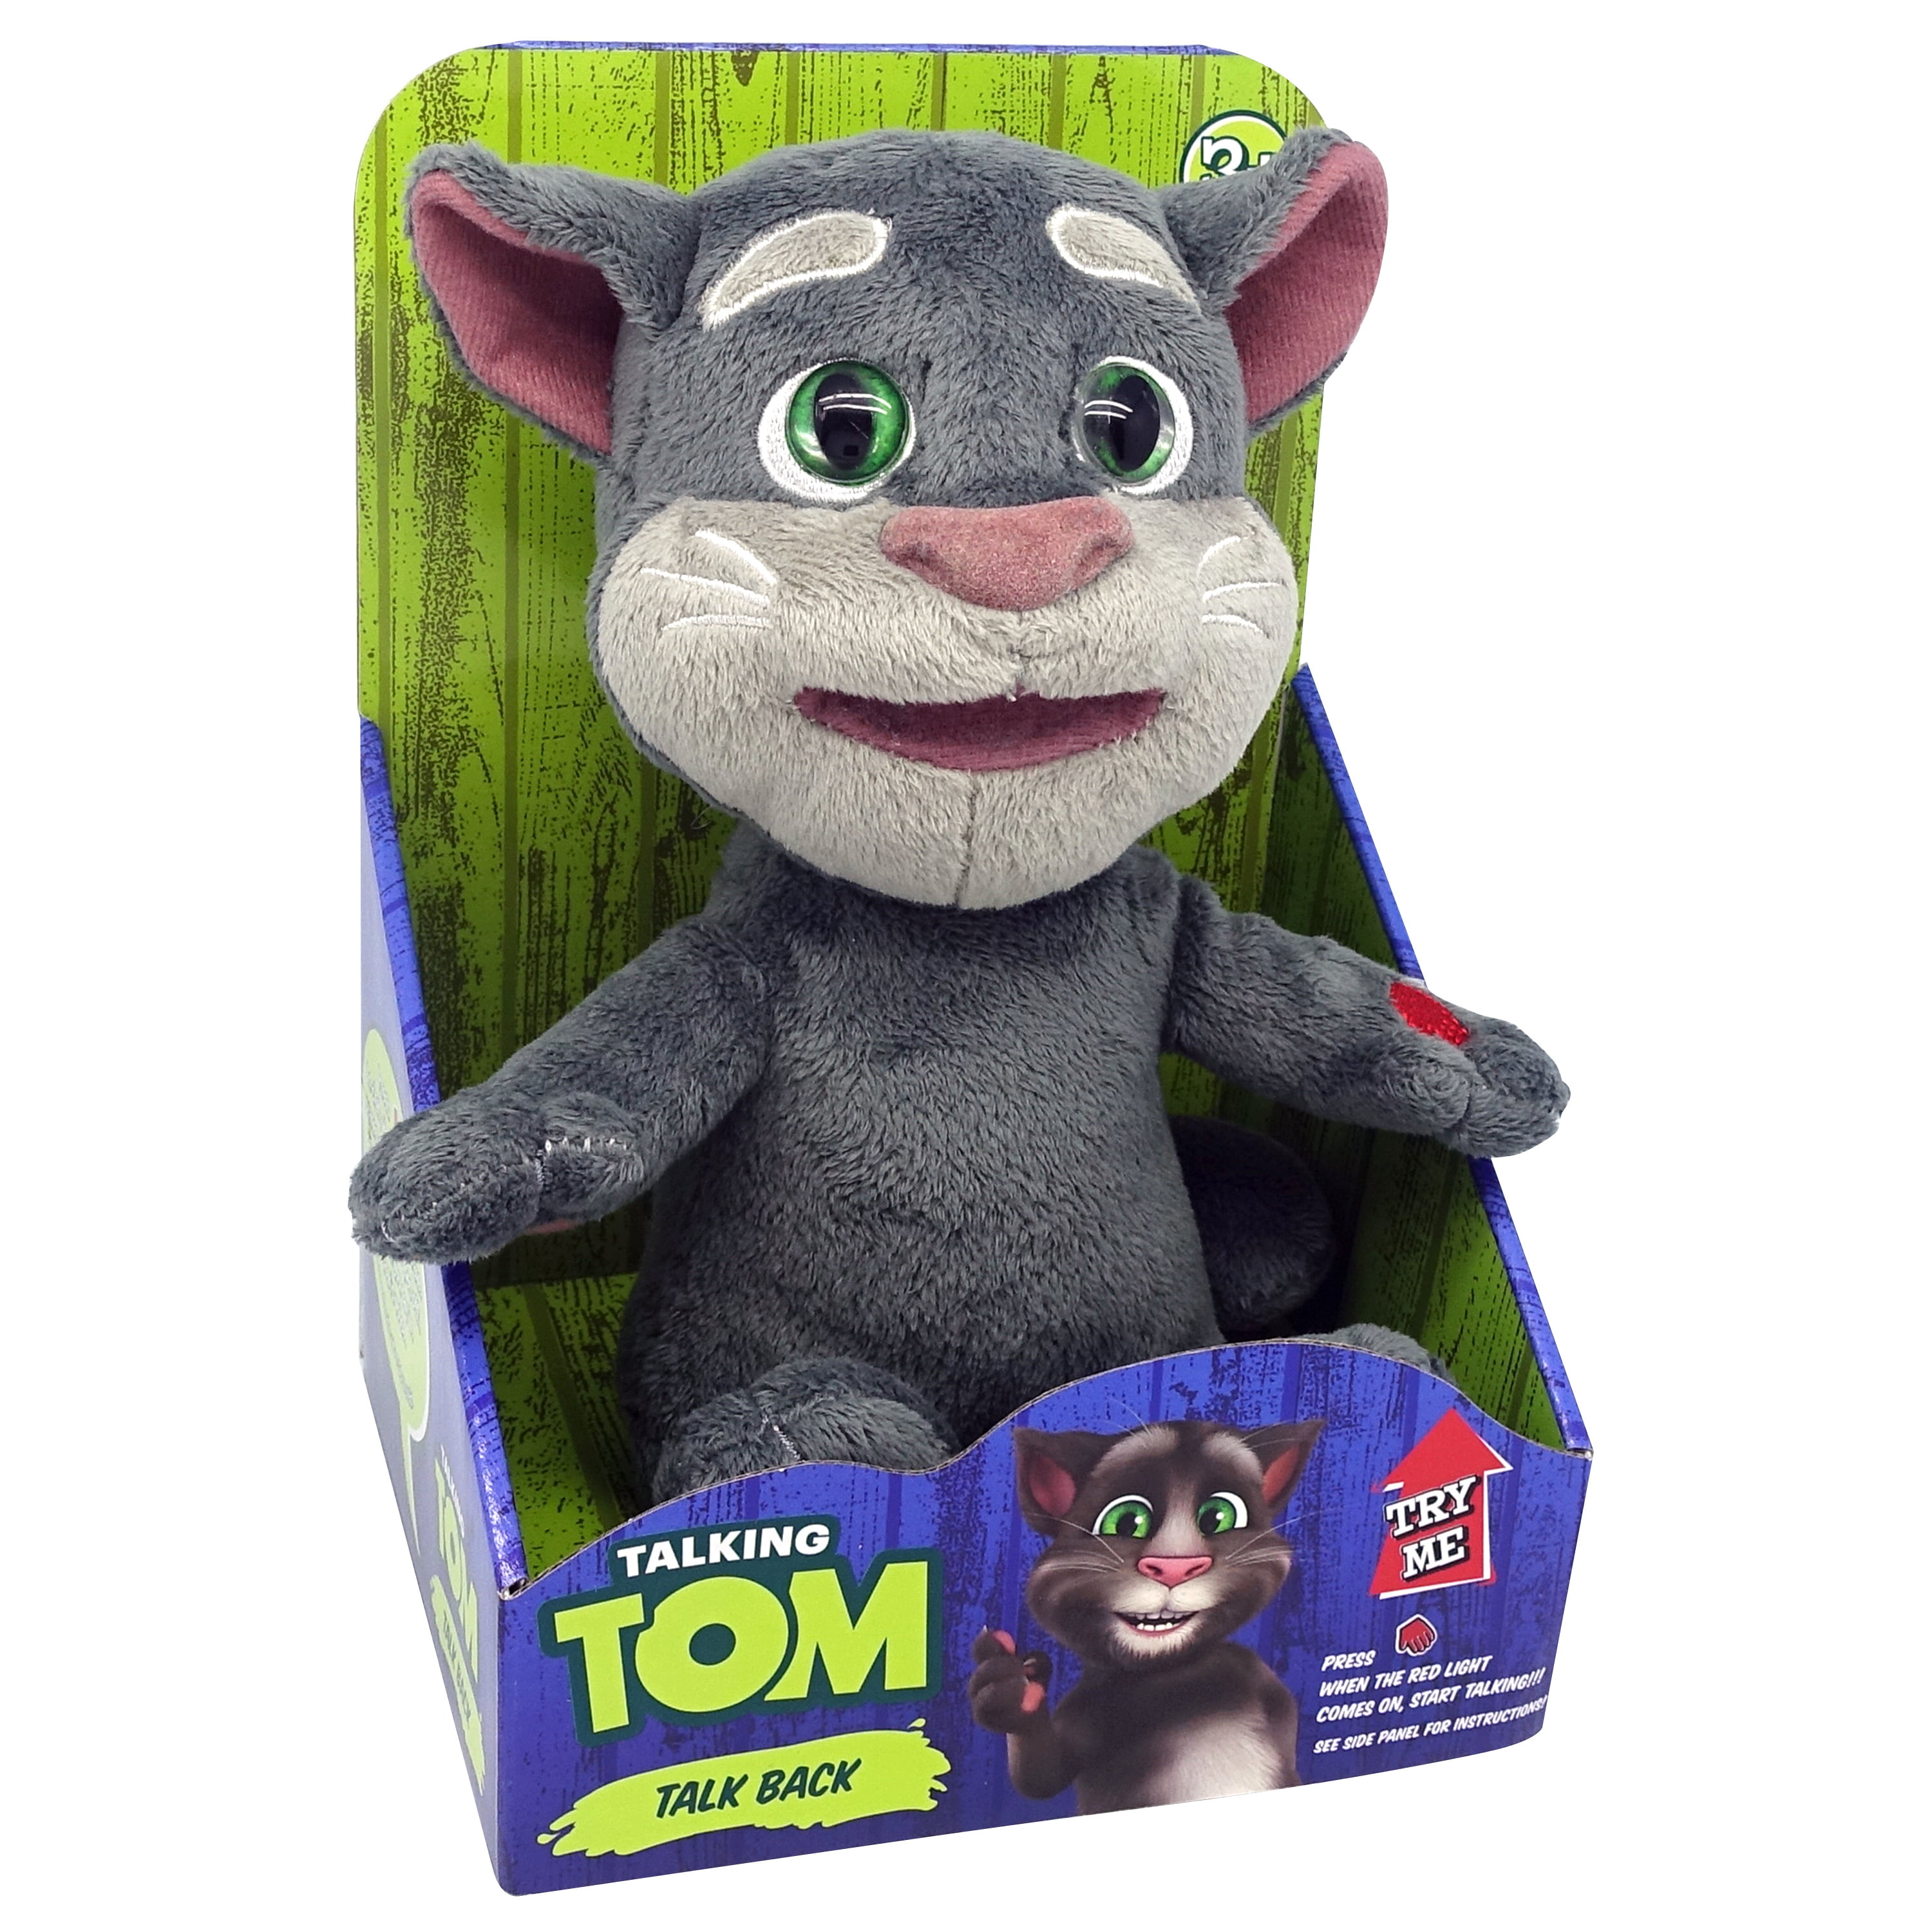 10" INTERACTIVE PLUSH TALKING TOM APP GAME KITTY CAT CHRISTMAS TOY GIFT AGE 3+ 